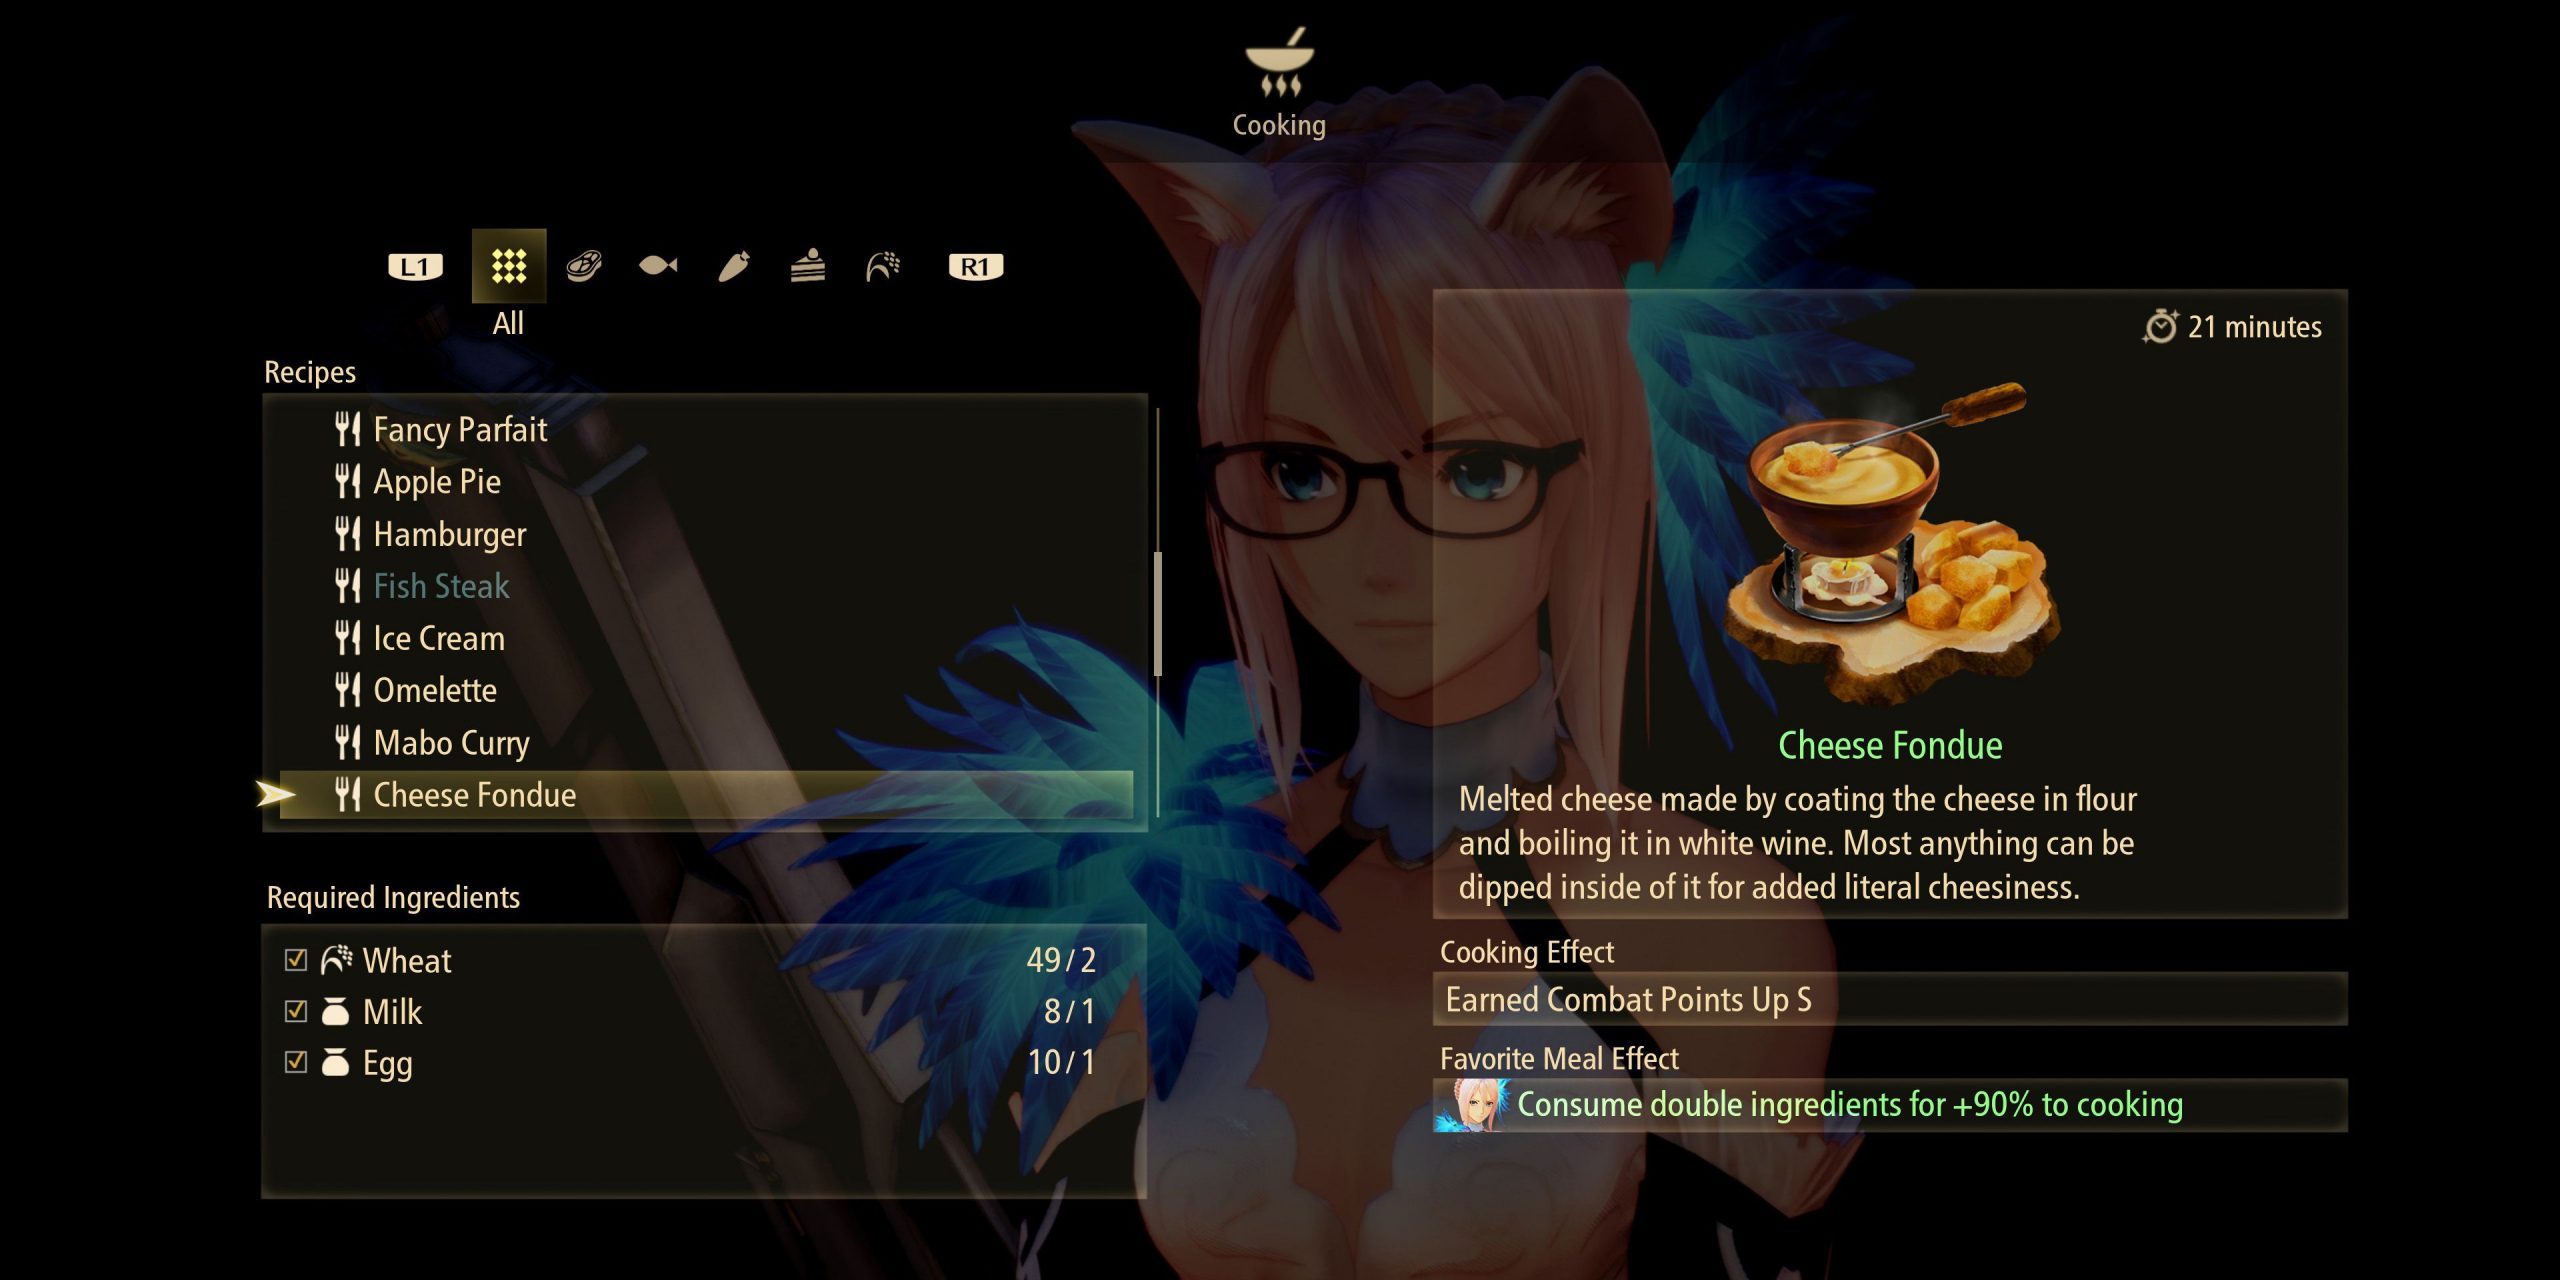 tales-of-arise-cooking-recipes-23-cheese-fondue-2688700